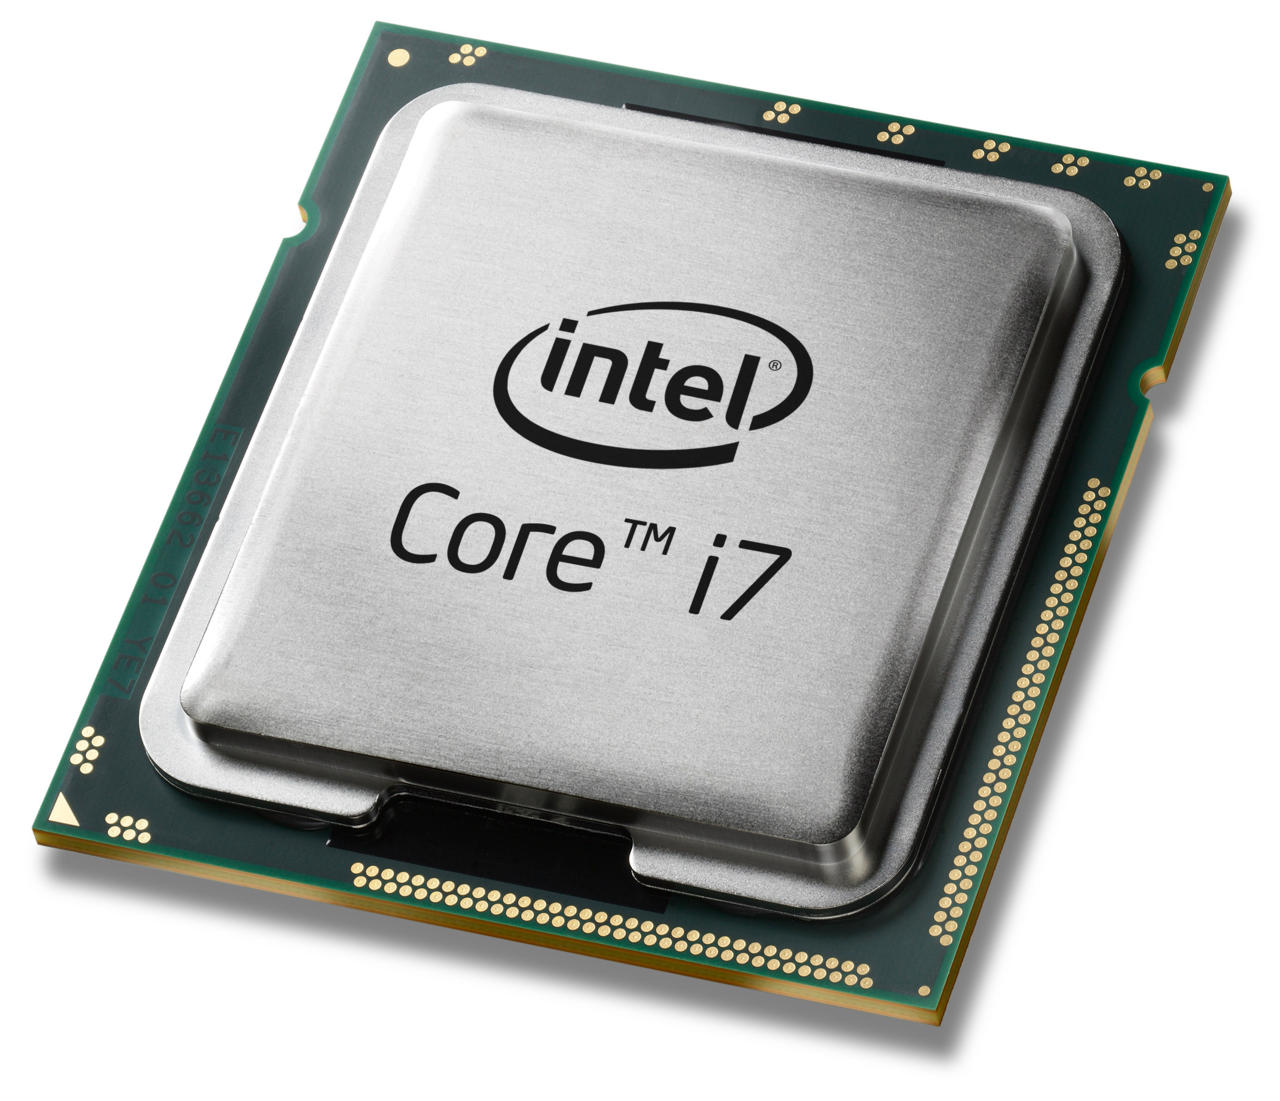 Intel will launch its new desktop CPUs